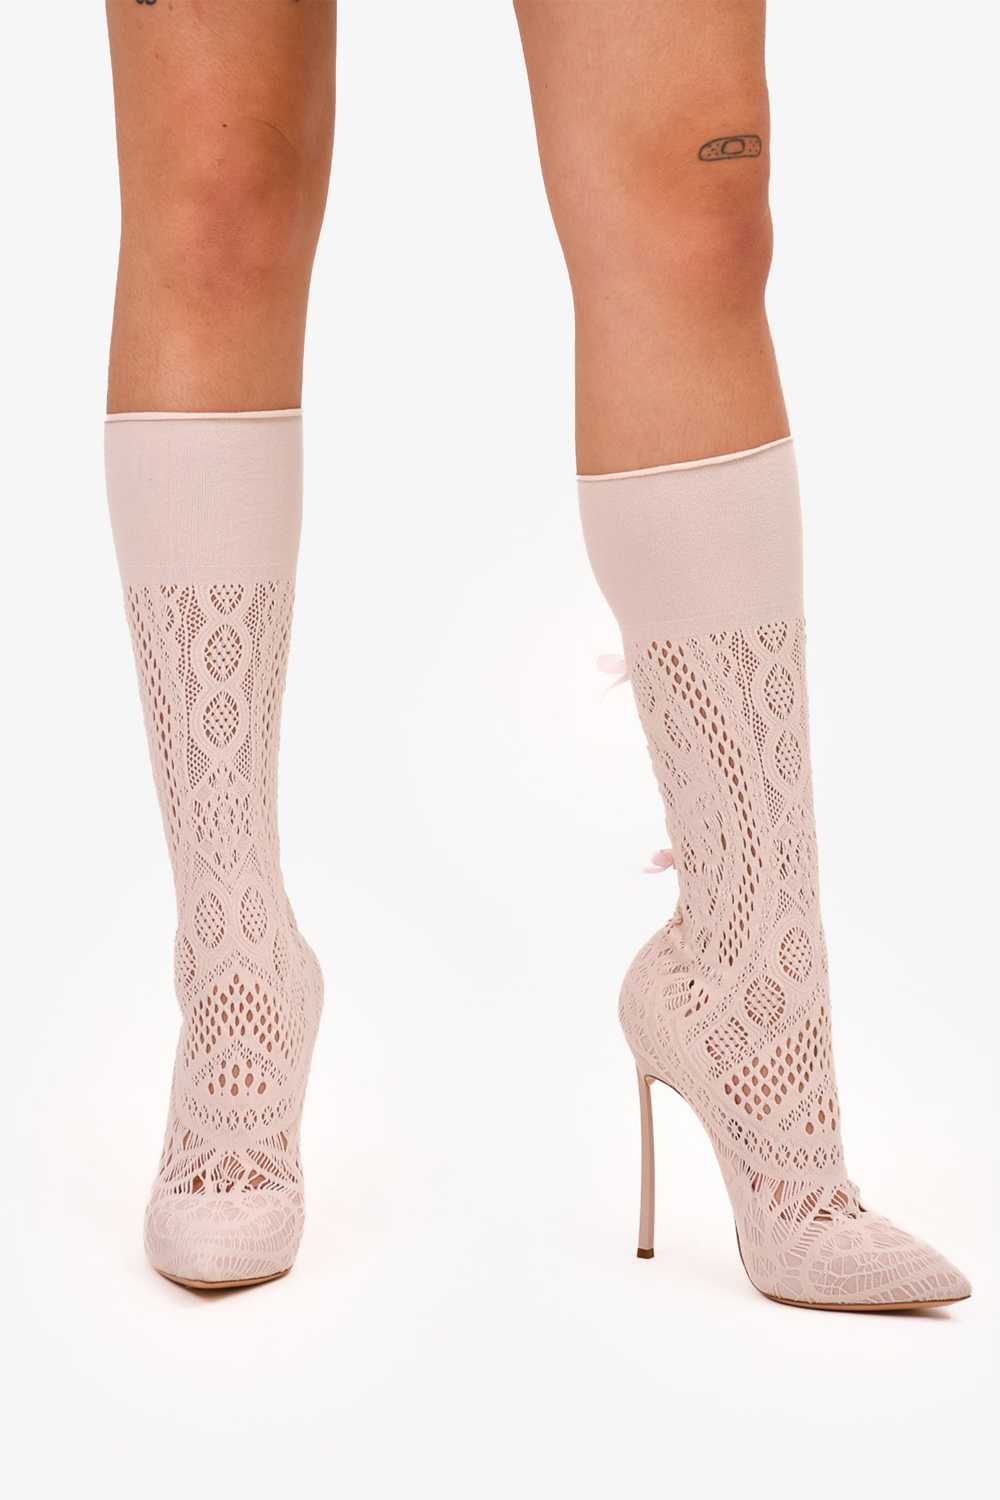 Casadei Pink Ribbon Detailed Sock Style Ankle Boo… - image 3